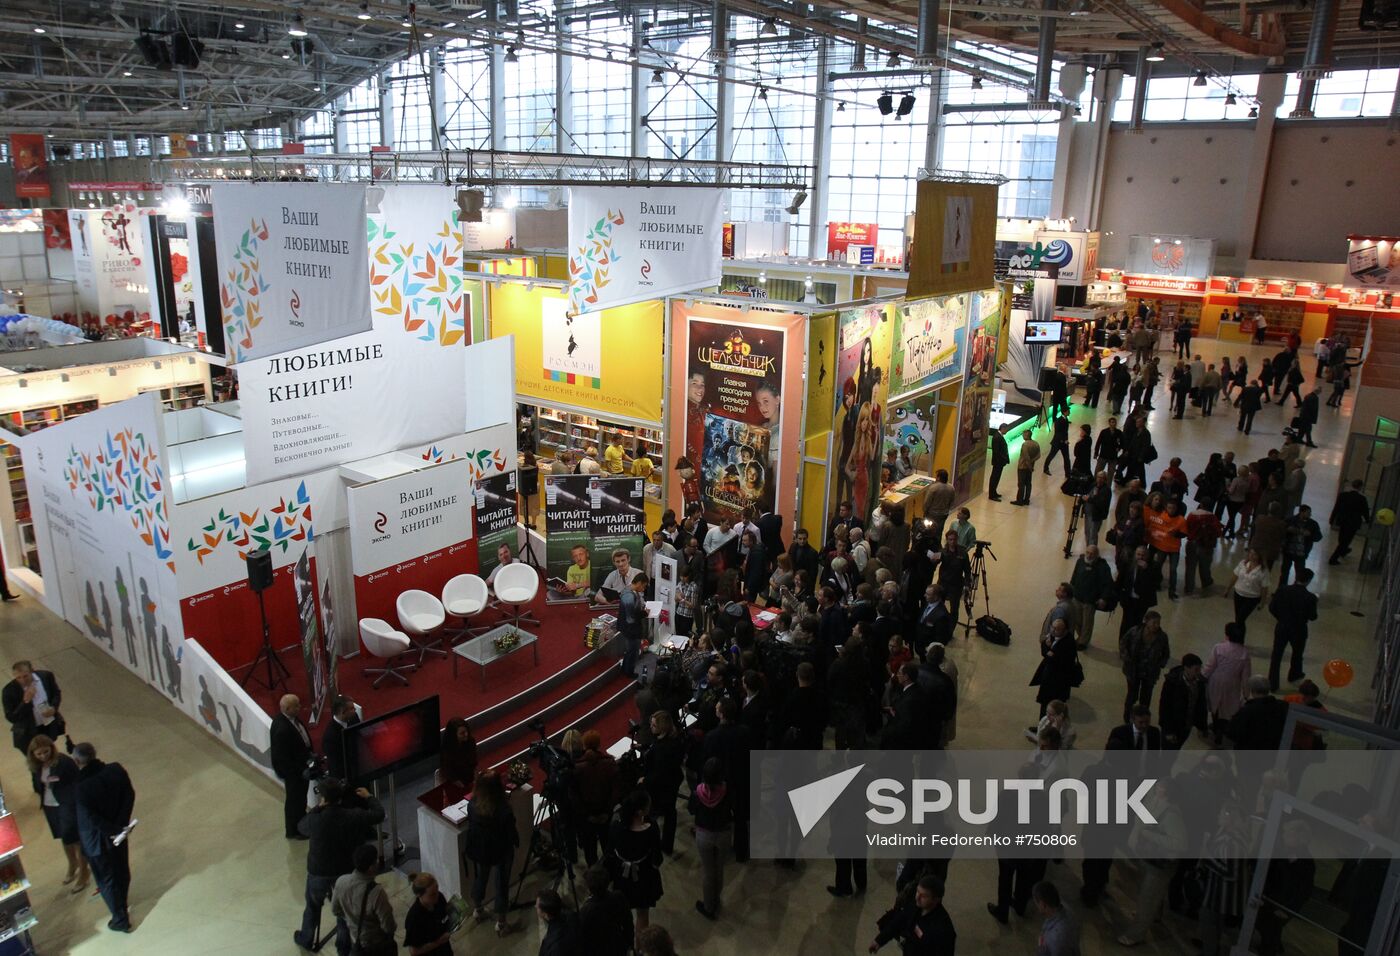 Opening of 23rd Moscow internation book exhibition-fair